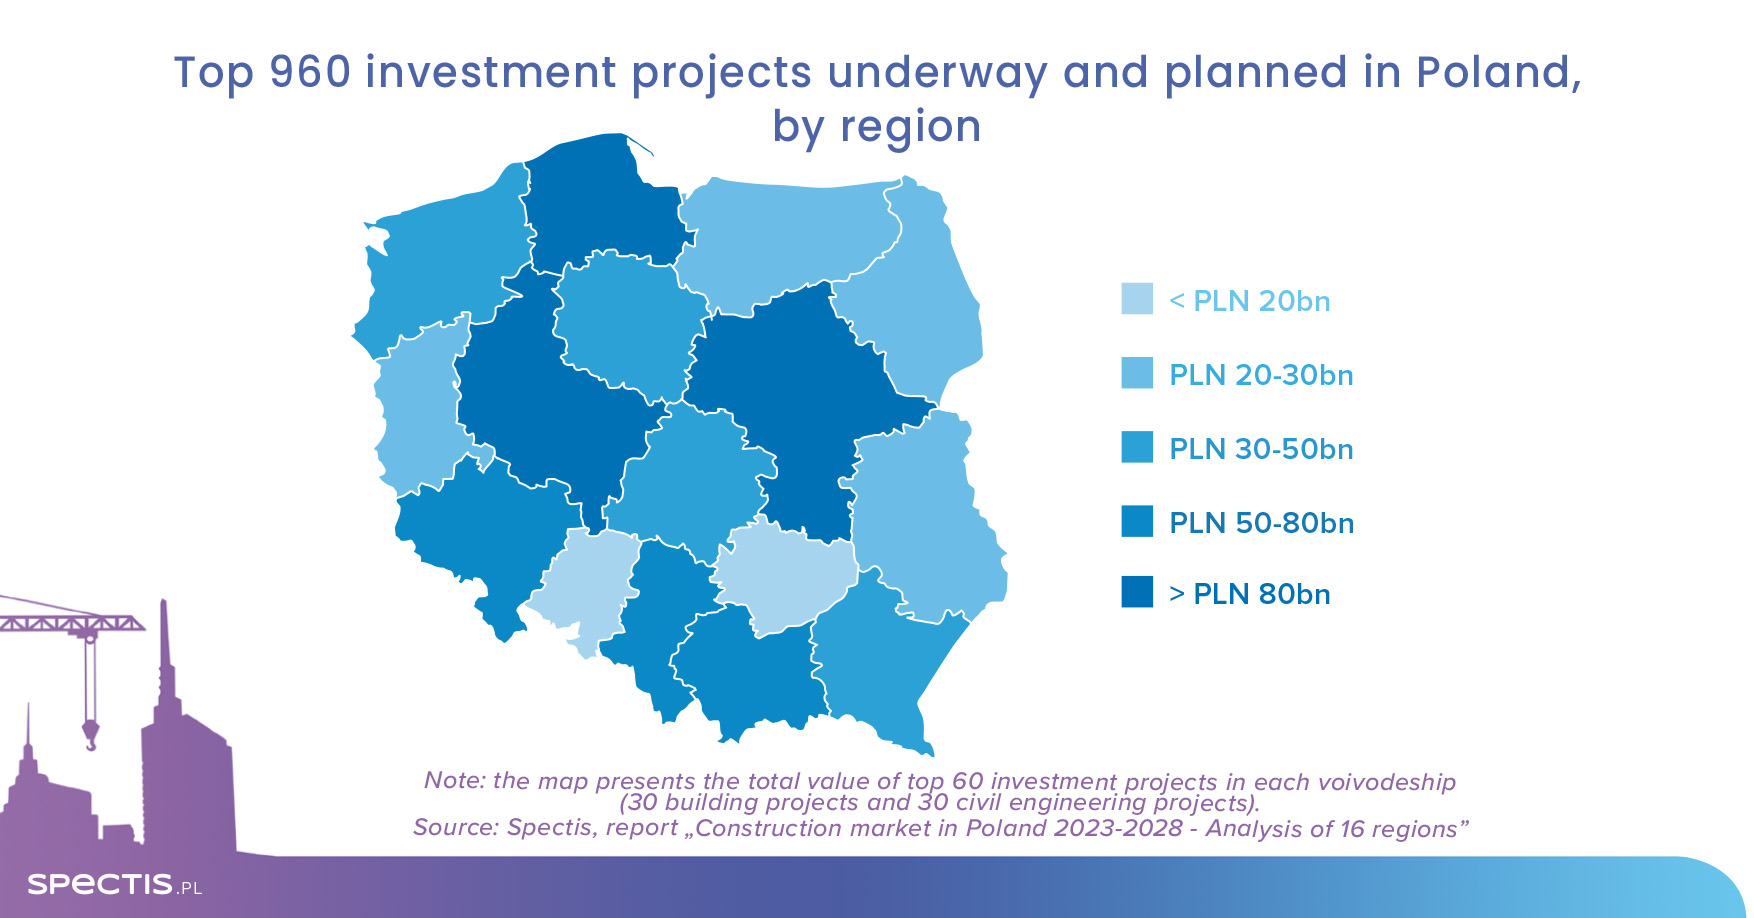 Nearly thousand top projects in Poland worth a whopping €190bn